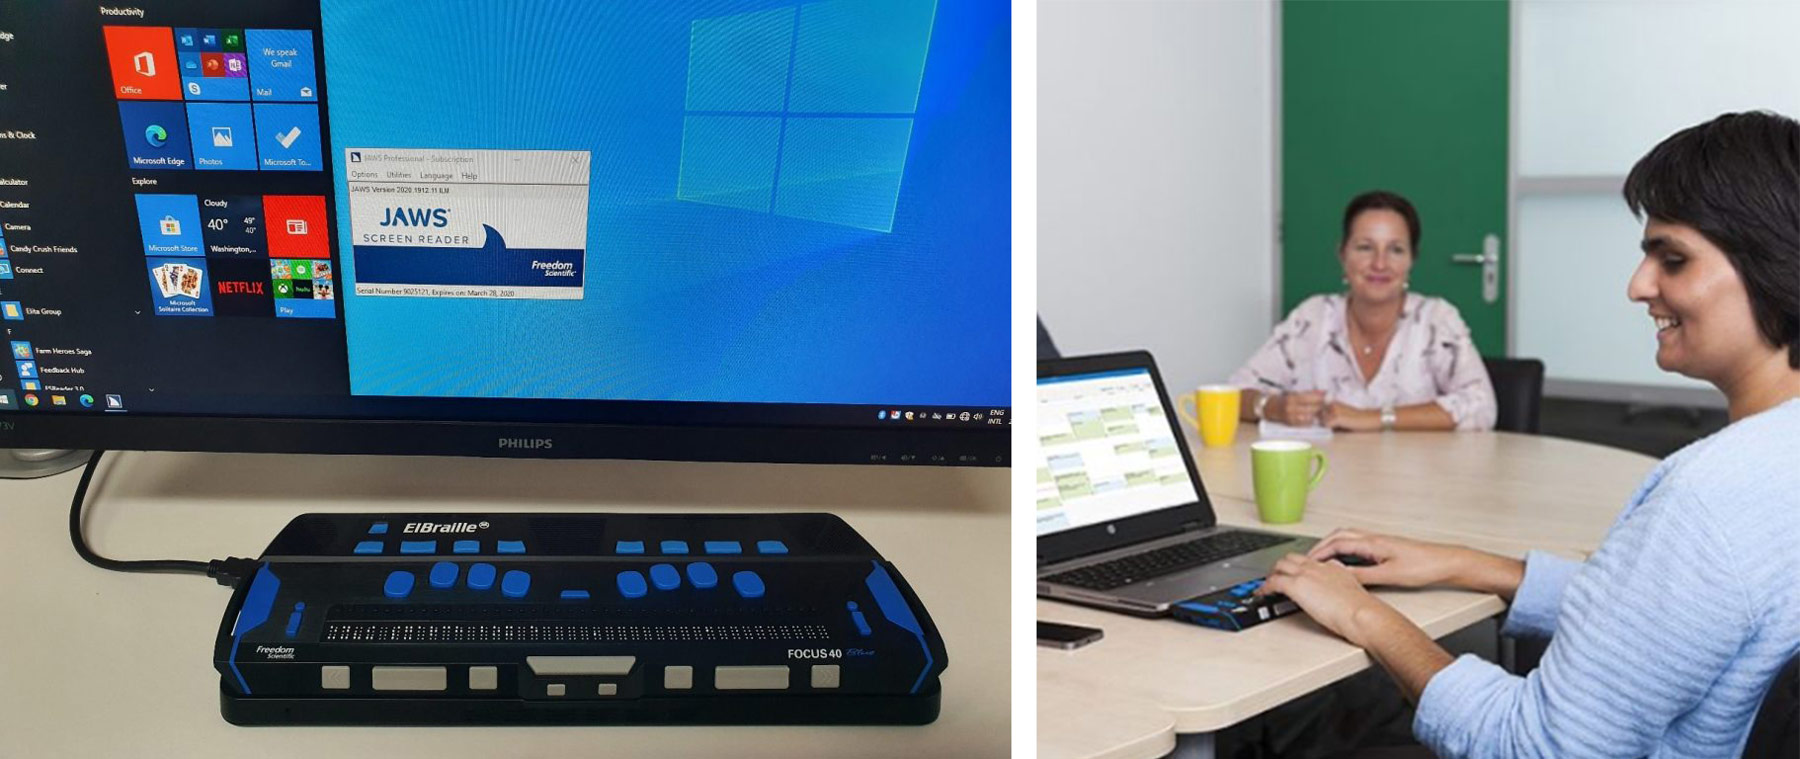 photos of Elbraille device, connected to a Windows 10 computer with JAWS application showing on-screen, and a woman smiling using the Elbraille device.